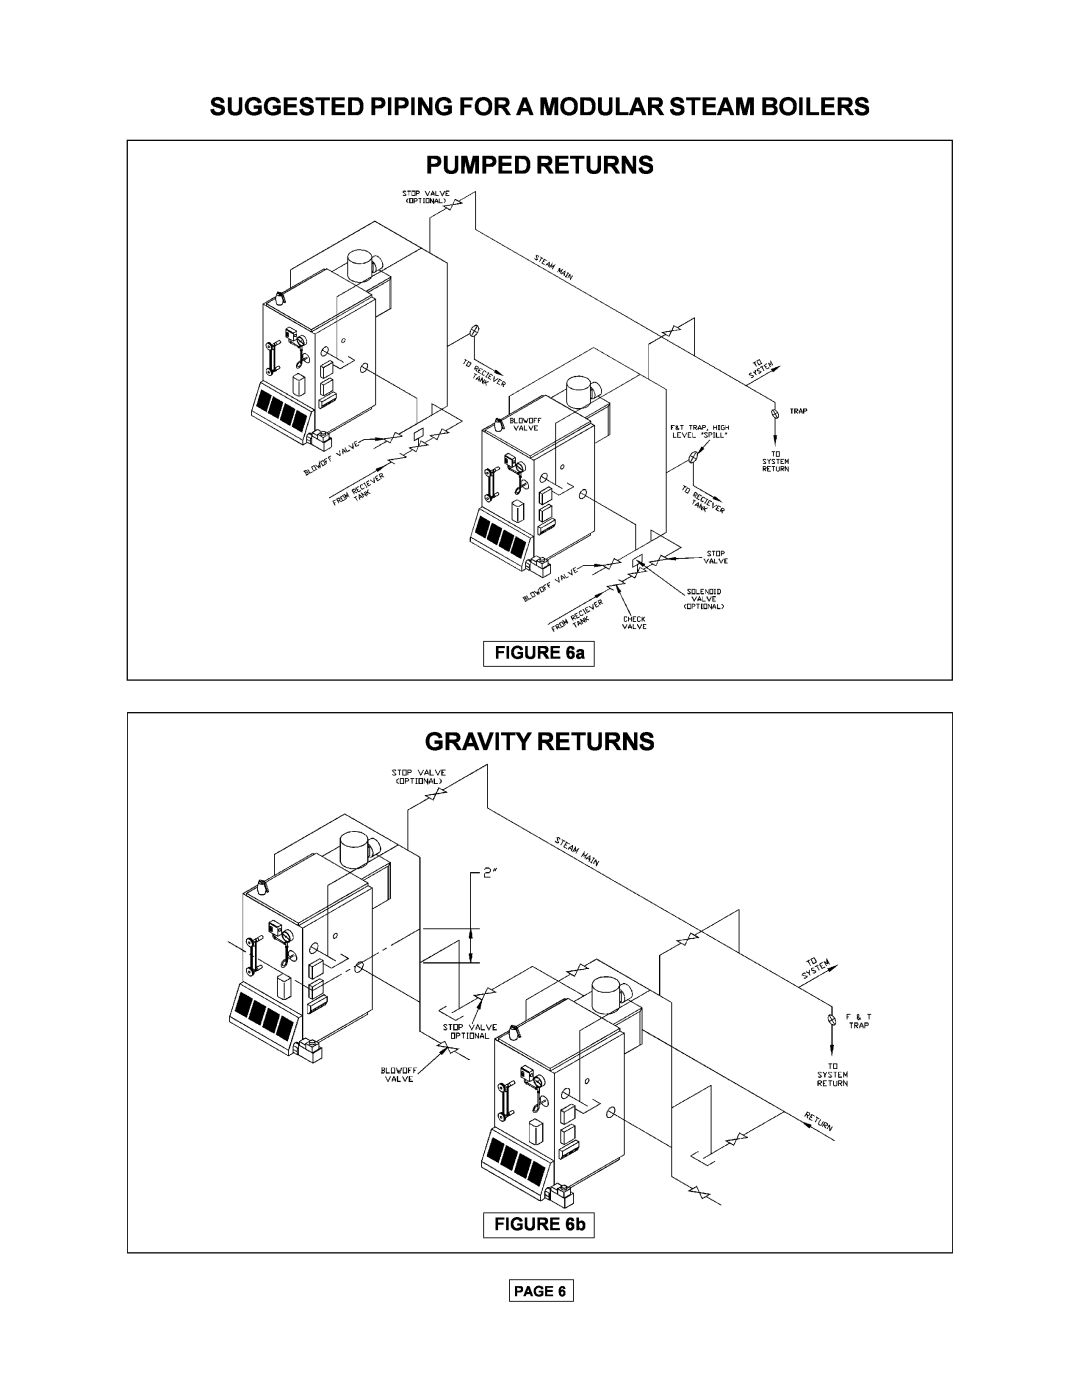 Utica PEG-C installation manual Suggested Piping For A Modular Steam Boilers, Pumped Returns, Gravity Returns, b, Page 